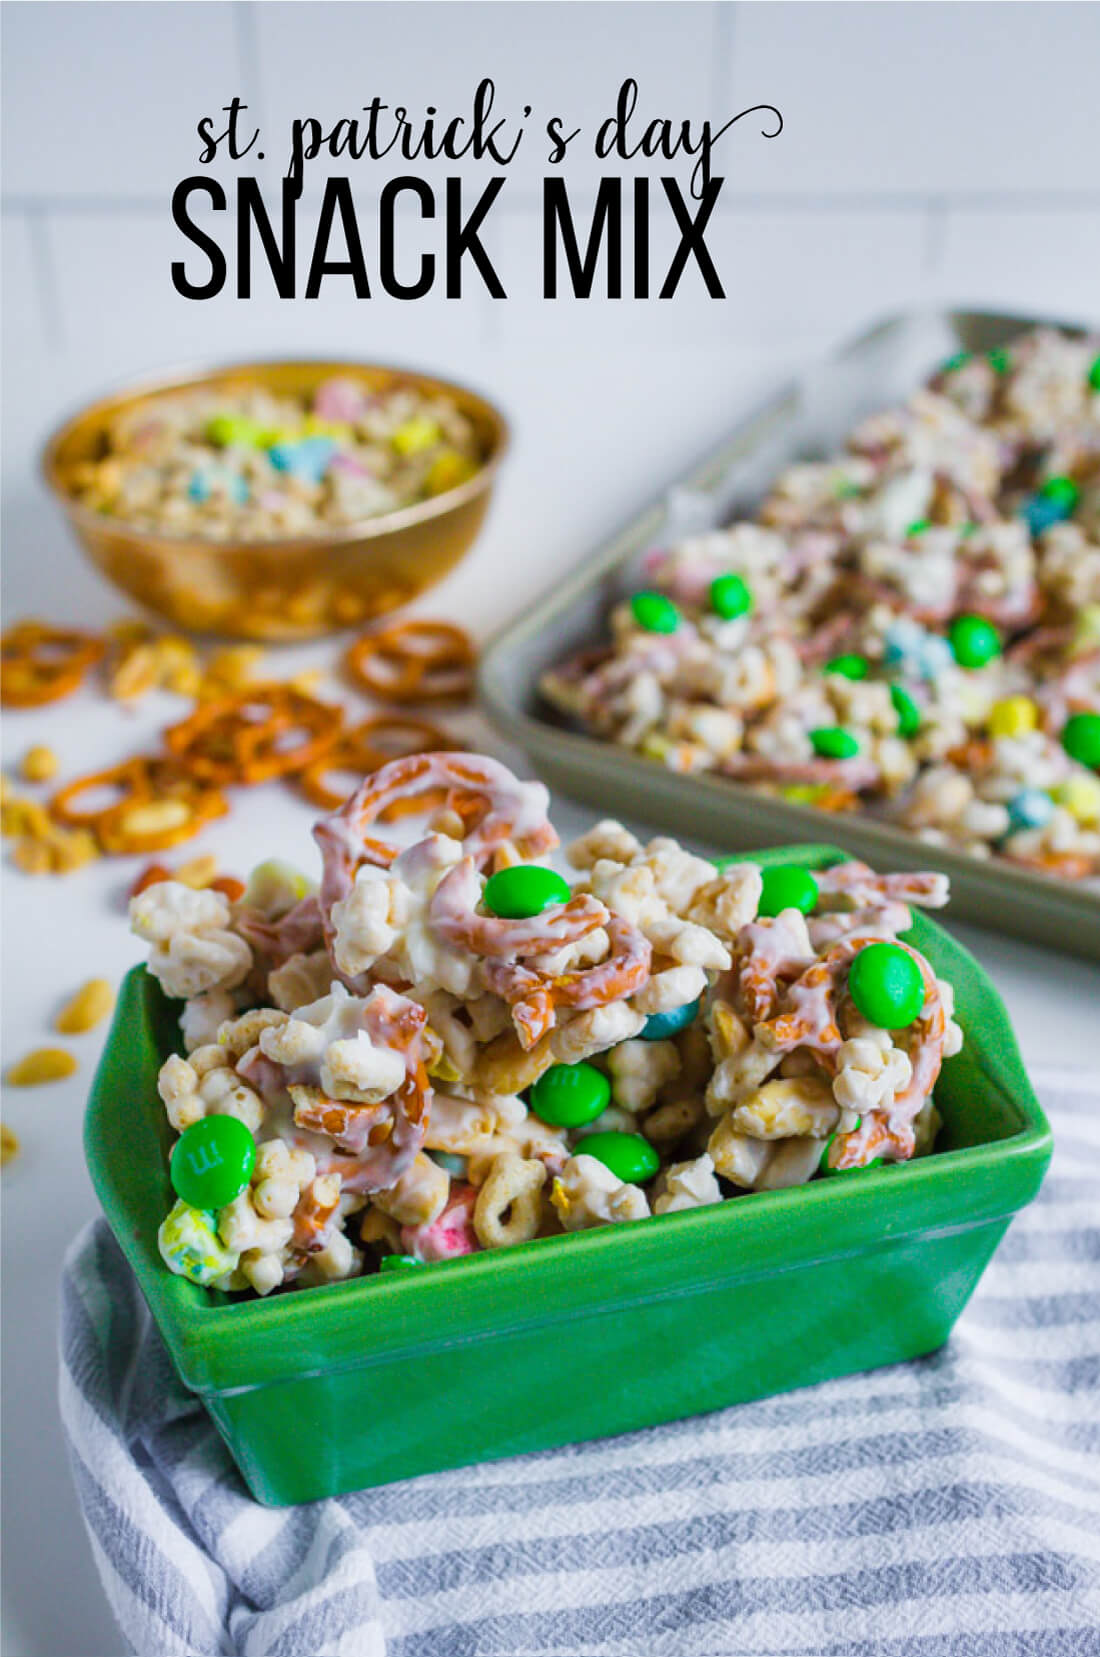 St Patrick's Day Food - Make this easy snack mix to celebrate the holiday. www.thirtyhandmadedays.com